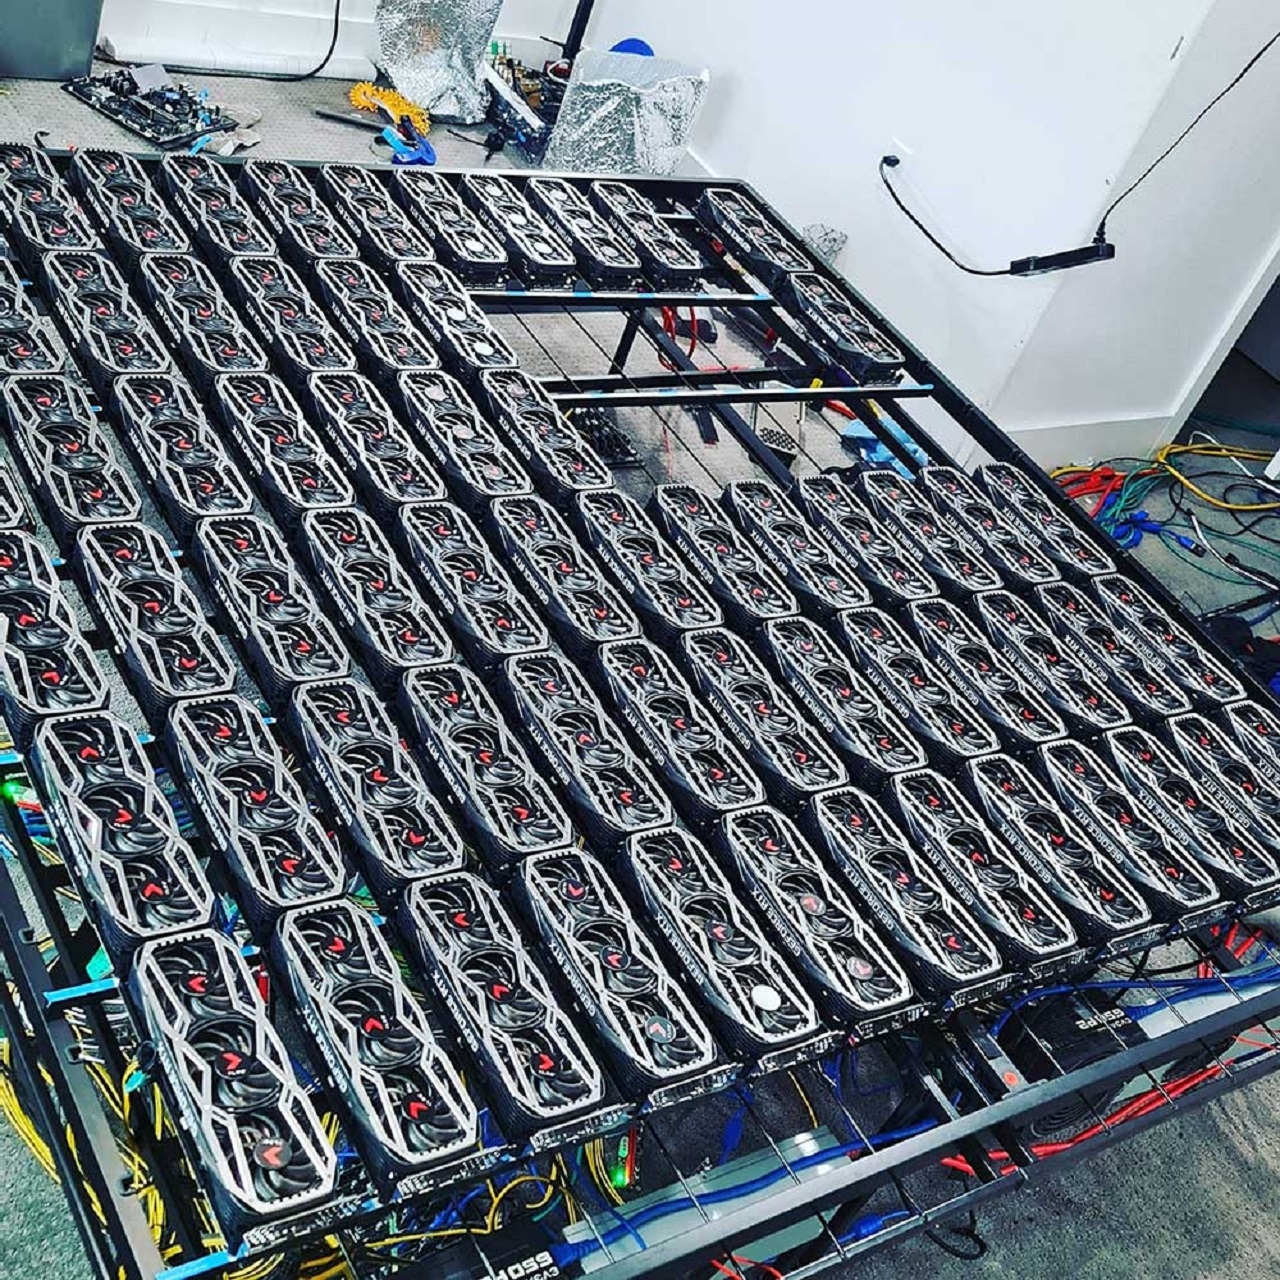 This 78 x GeForce RTX 3080 crypto mining rig makes $128,000 per year